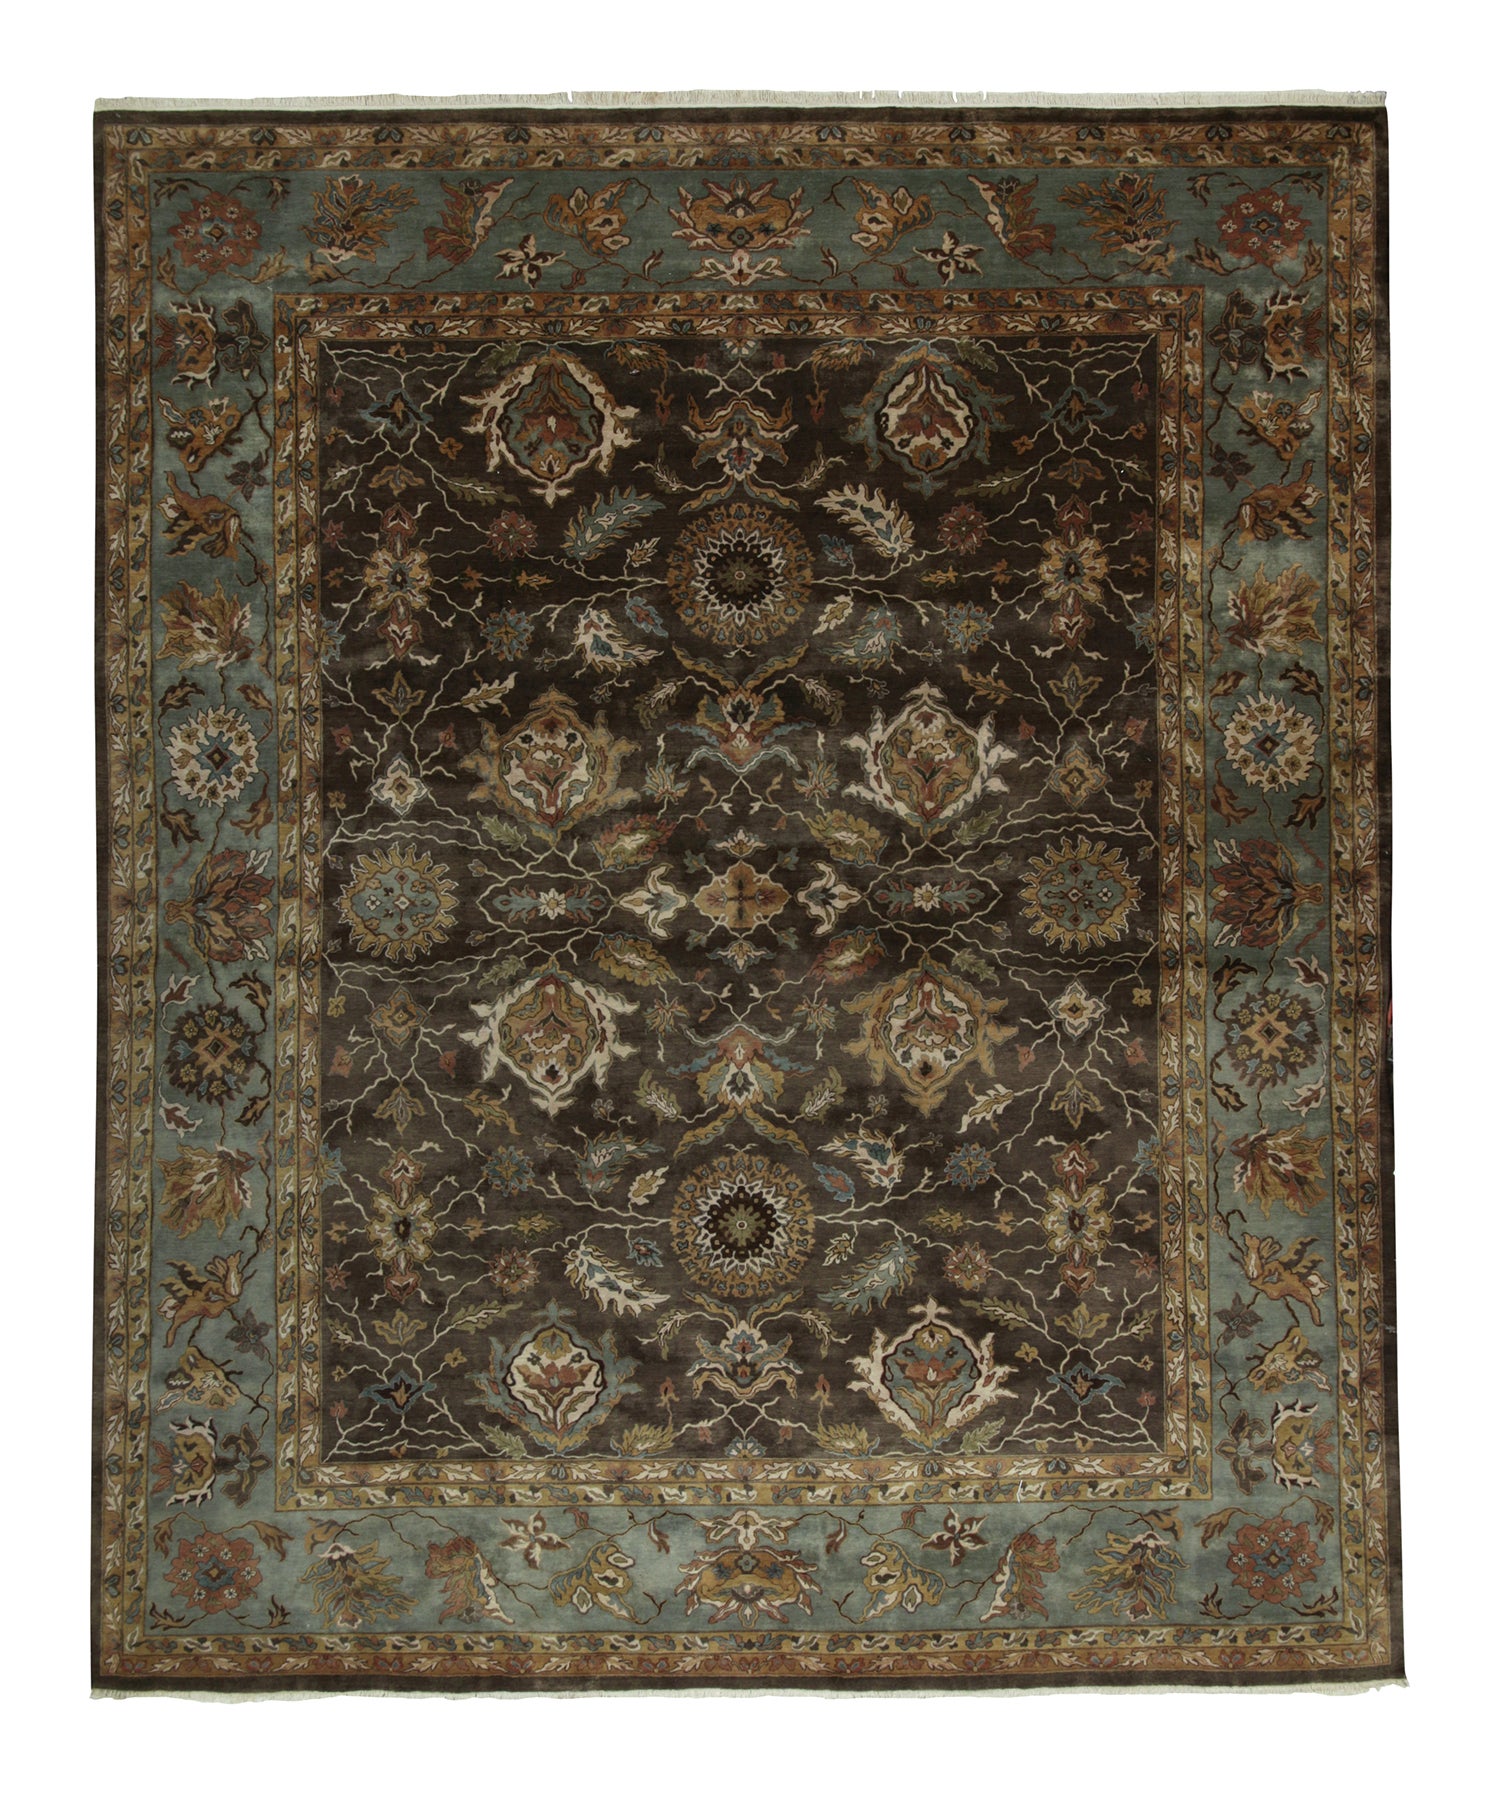 Rug & Kilim’s Classic Tabriz style rug in Brown, Blue and Gold Floral Patterns For Sale